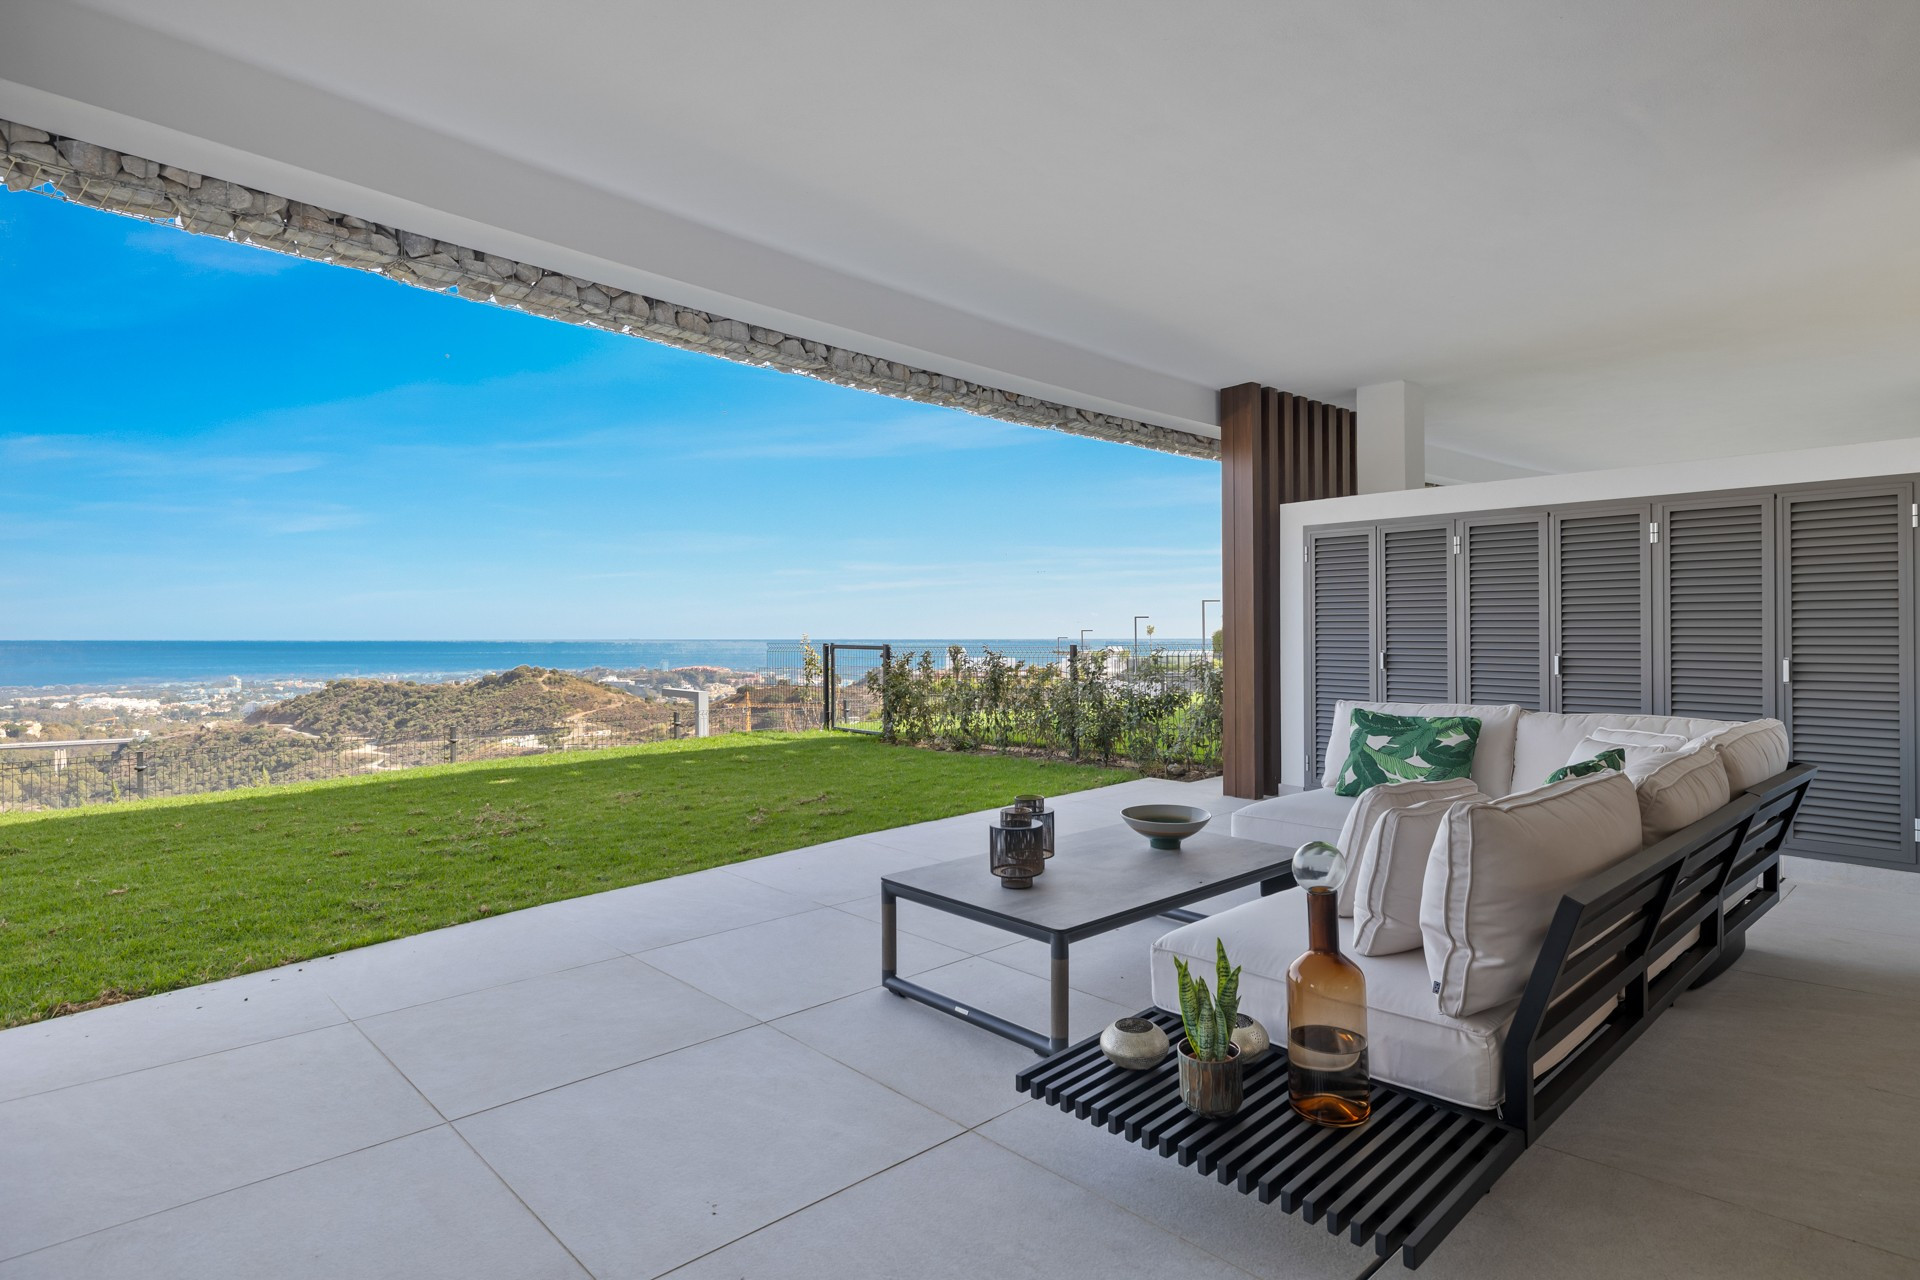 Brand new top-quality ground floor apartment in Real de la Quinta with amazing open panoramic views to the Mediterranean sea